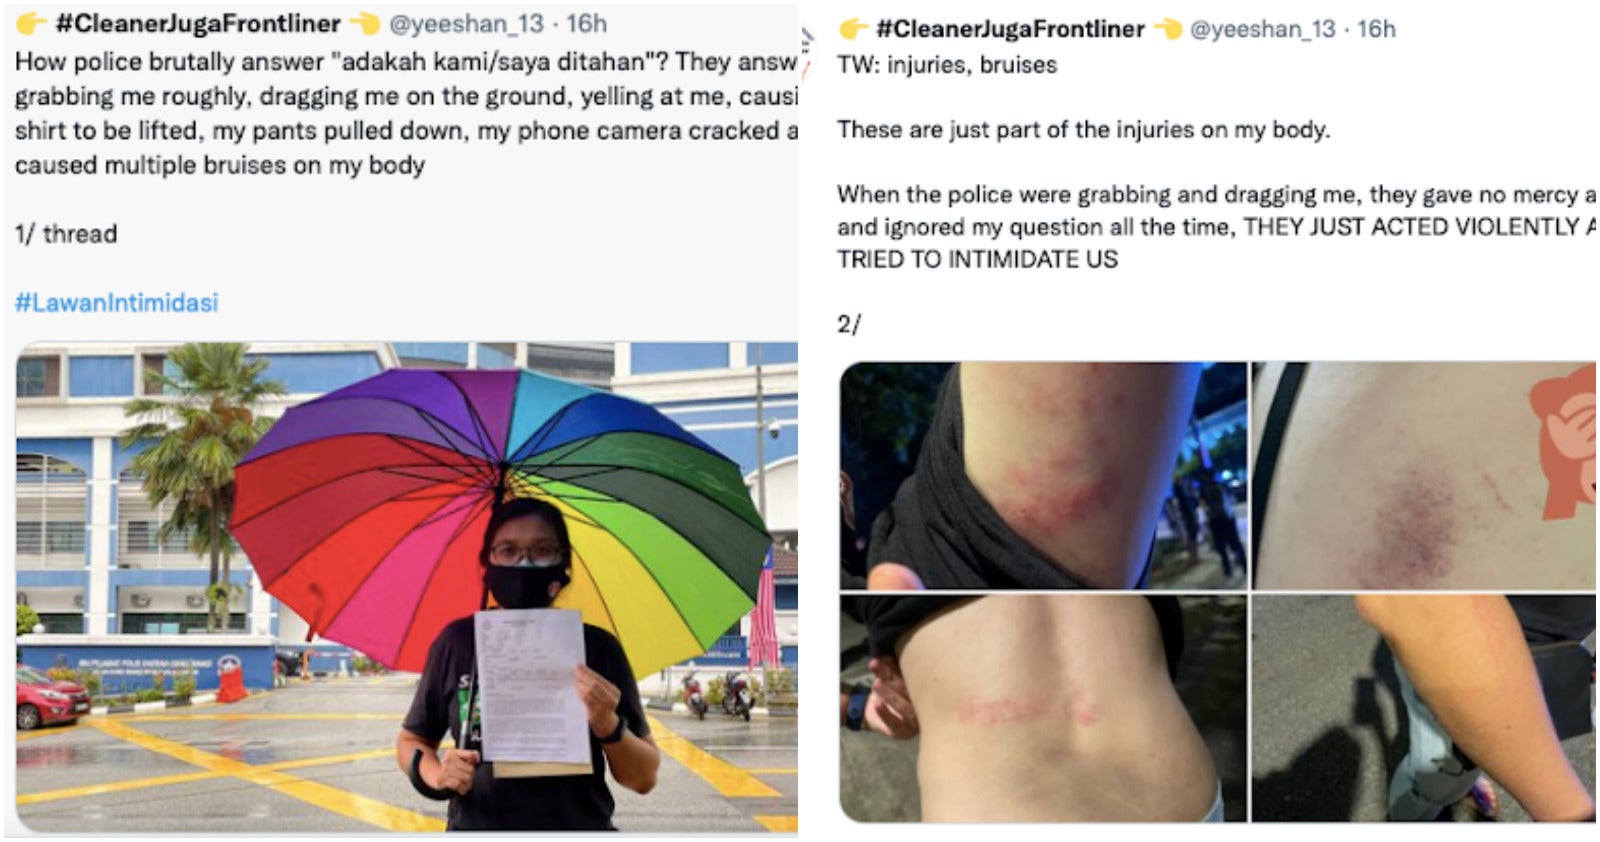 I was bruised and roughed up by PDRM says Twitter user CleanerJugaFrontliner